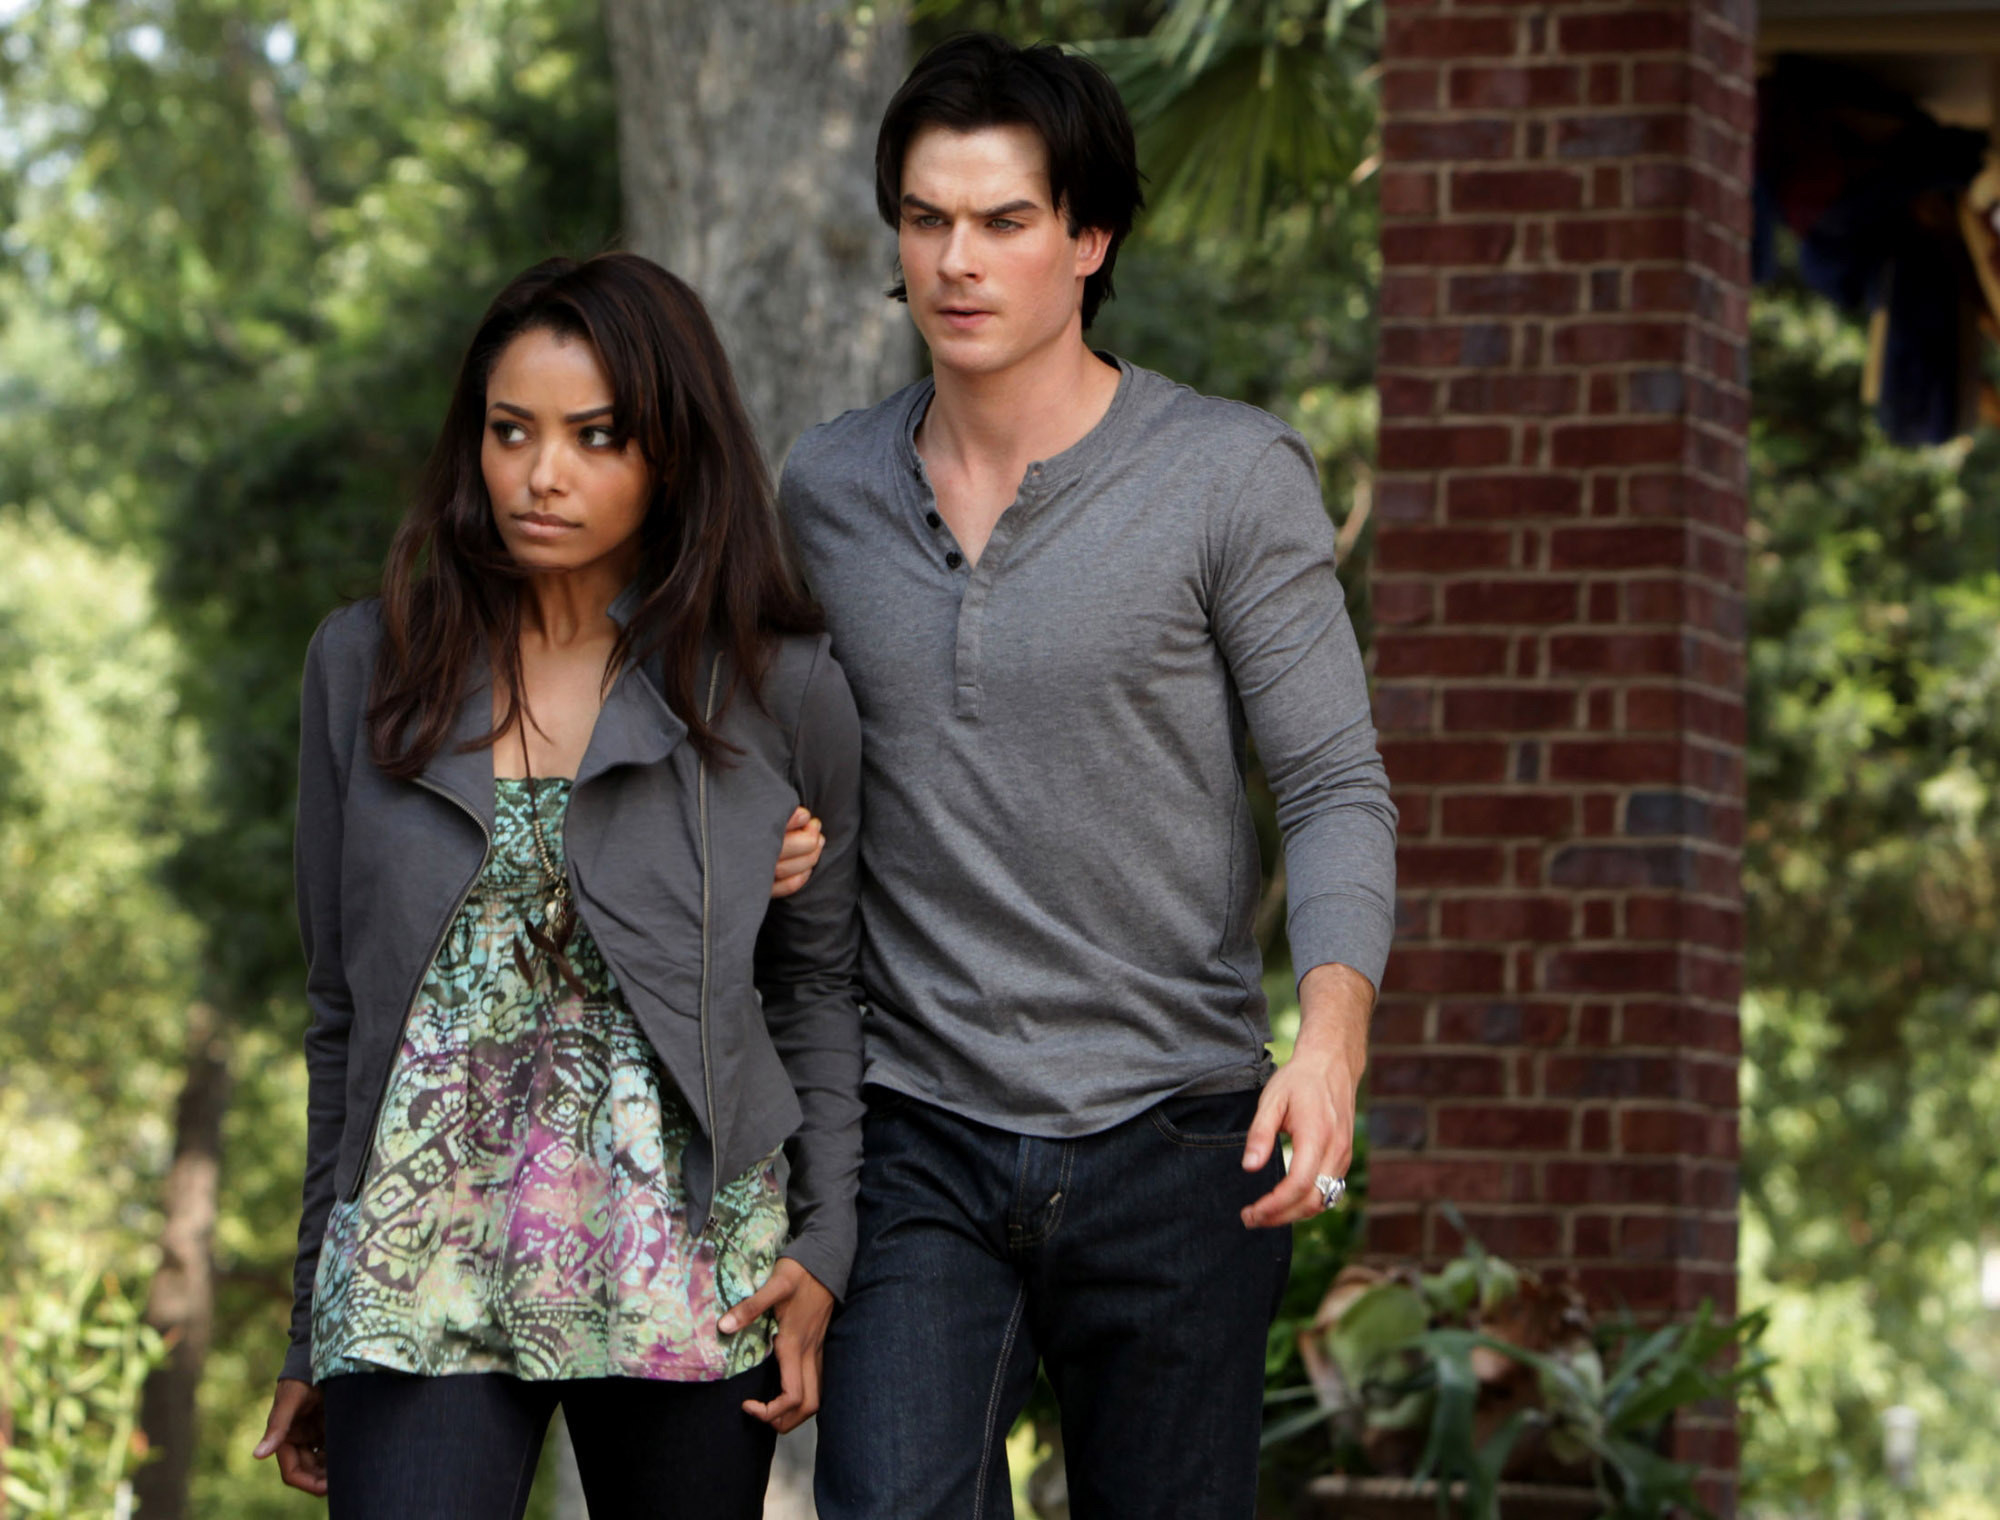 Kat Graham and Ian Somerhalder stand outside in &quot;The Vampire Diaries&quot;